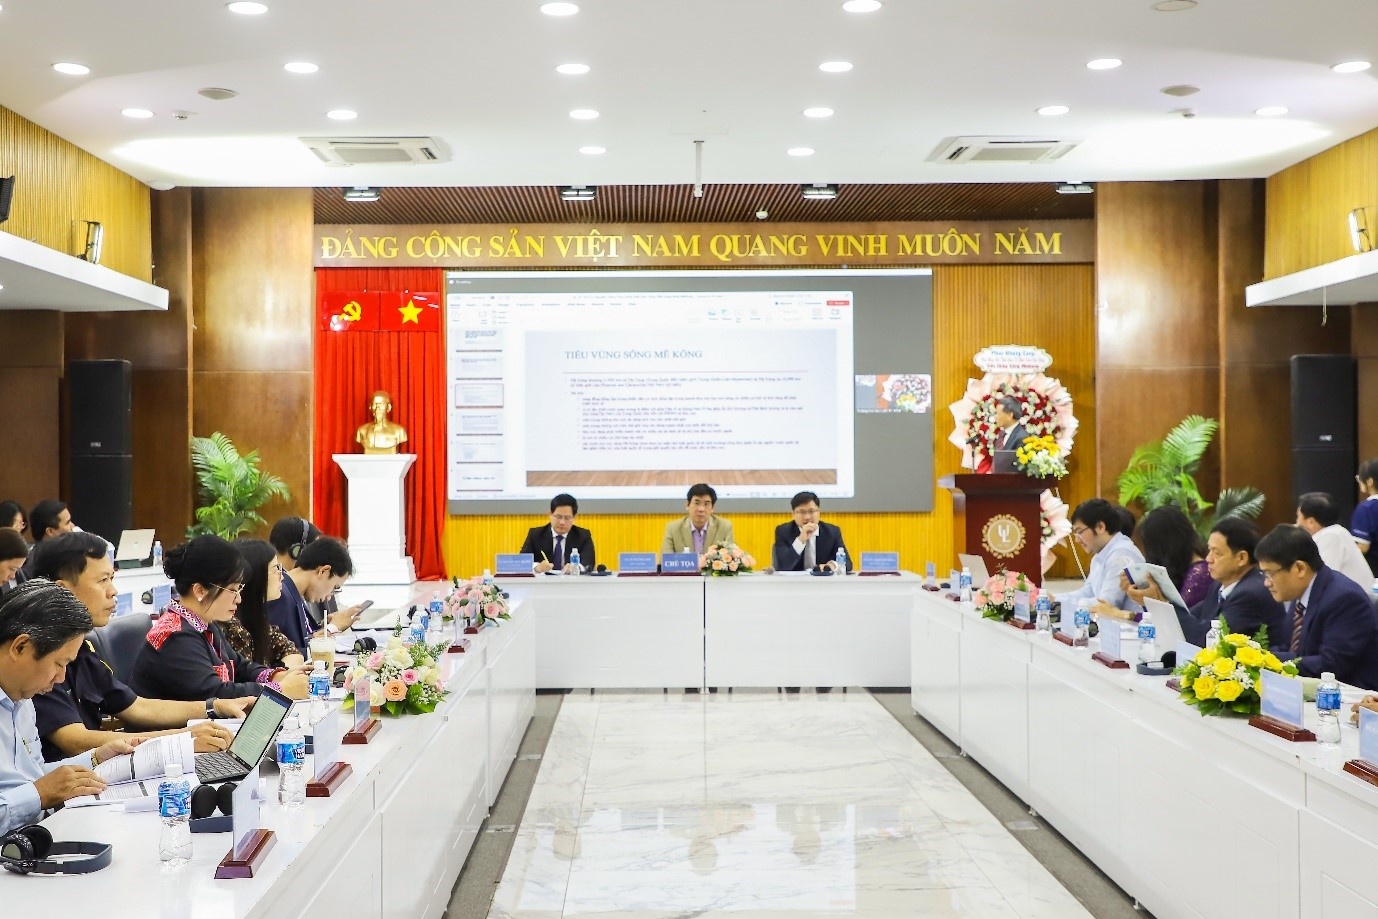 Solutions to promote sustainable livelihoods in Mekong sub-region